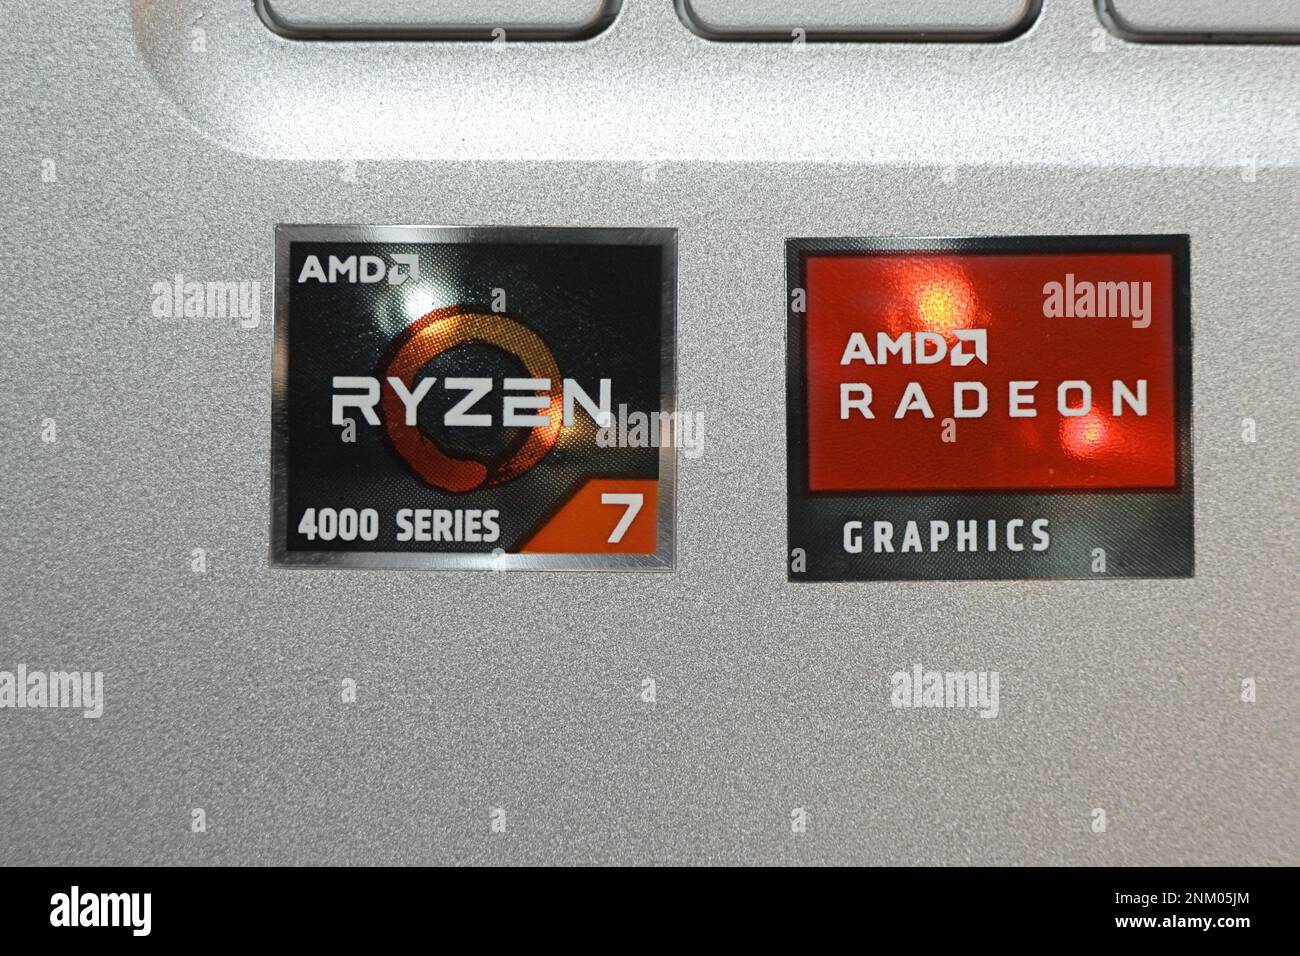 New York, NY - March 16, 2021: AMD RYZEN 7 4000 series CPU and AMD RADEON  graphic card stickers on a silver laptop Stock Photo - Alamy